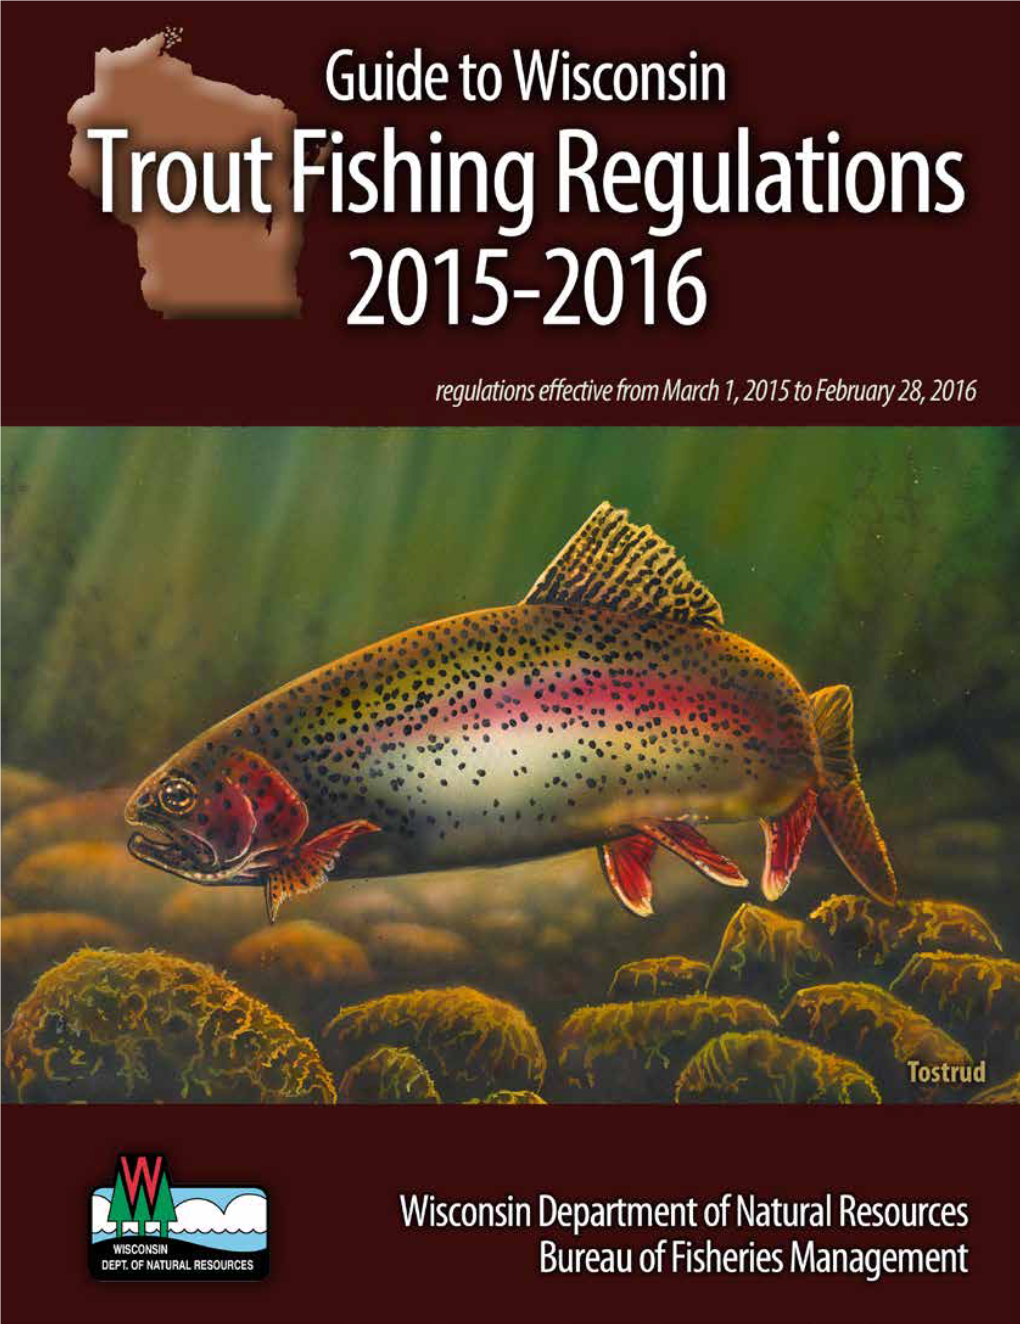 Your Guide to Regulations and Better Trout Fishing This Guide Is Specific to Inland (Including Streams That Flow Into the Great Lakes) Trout Fishing